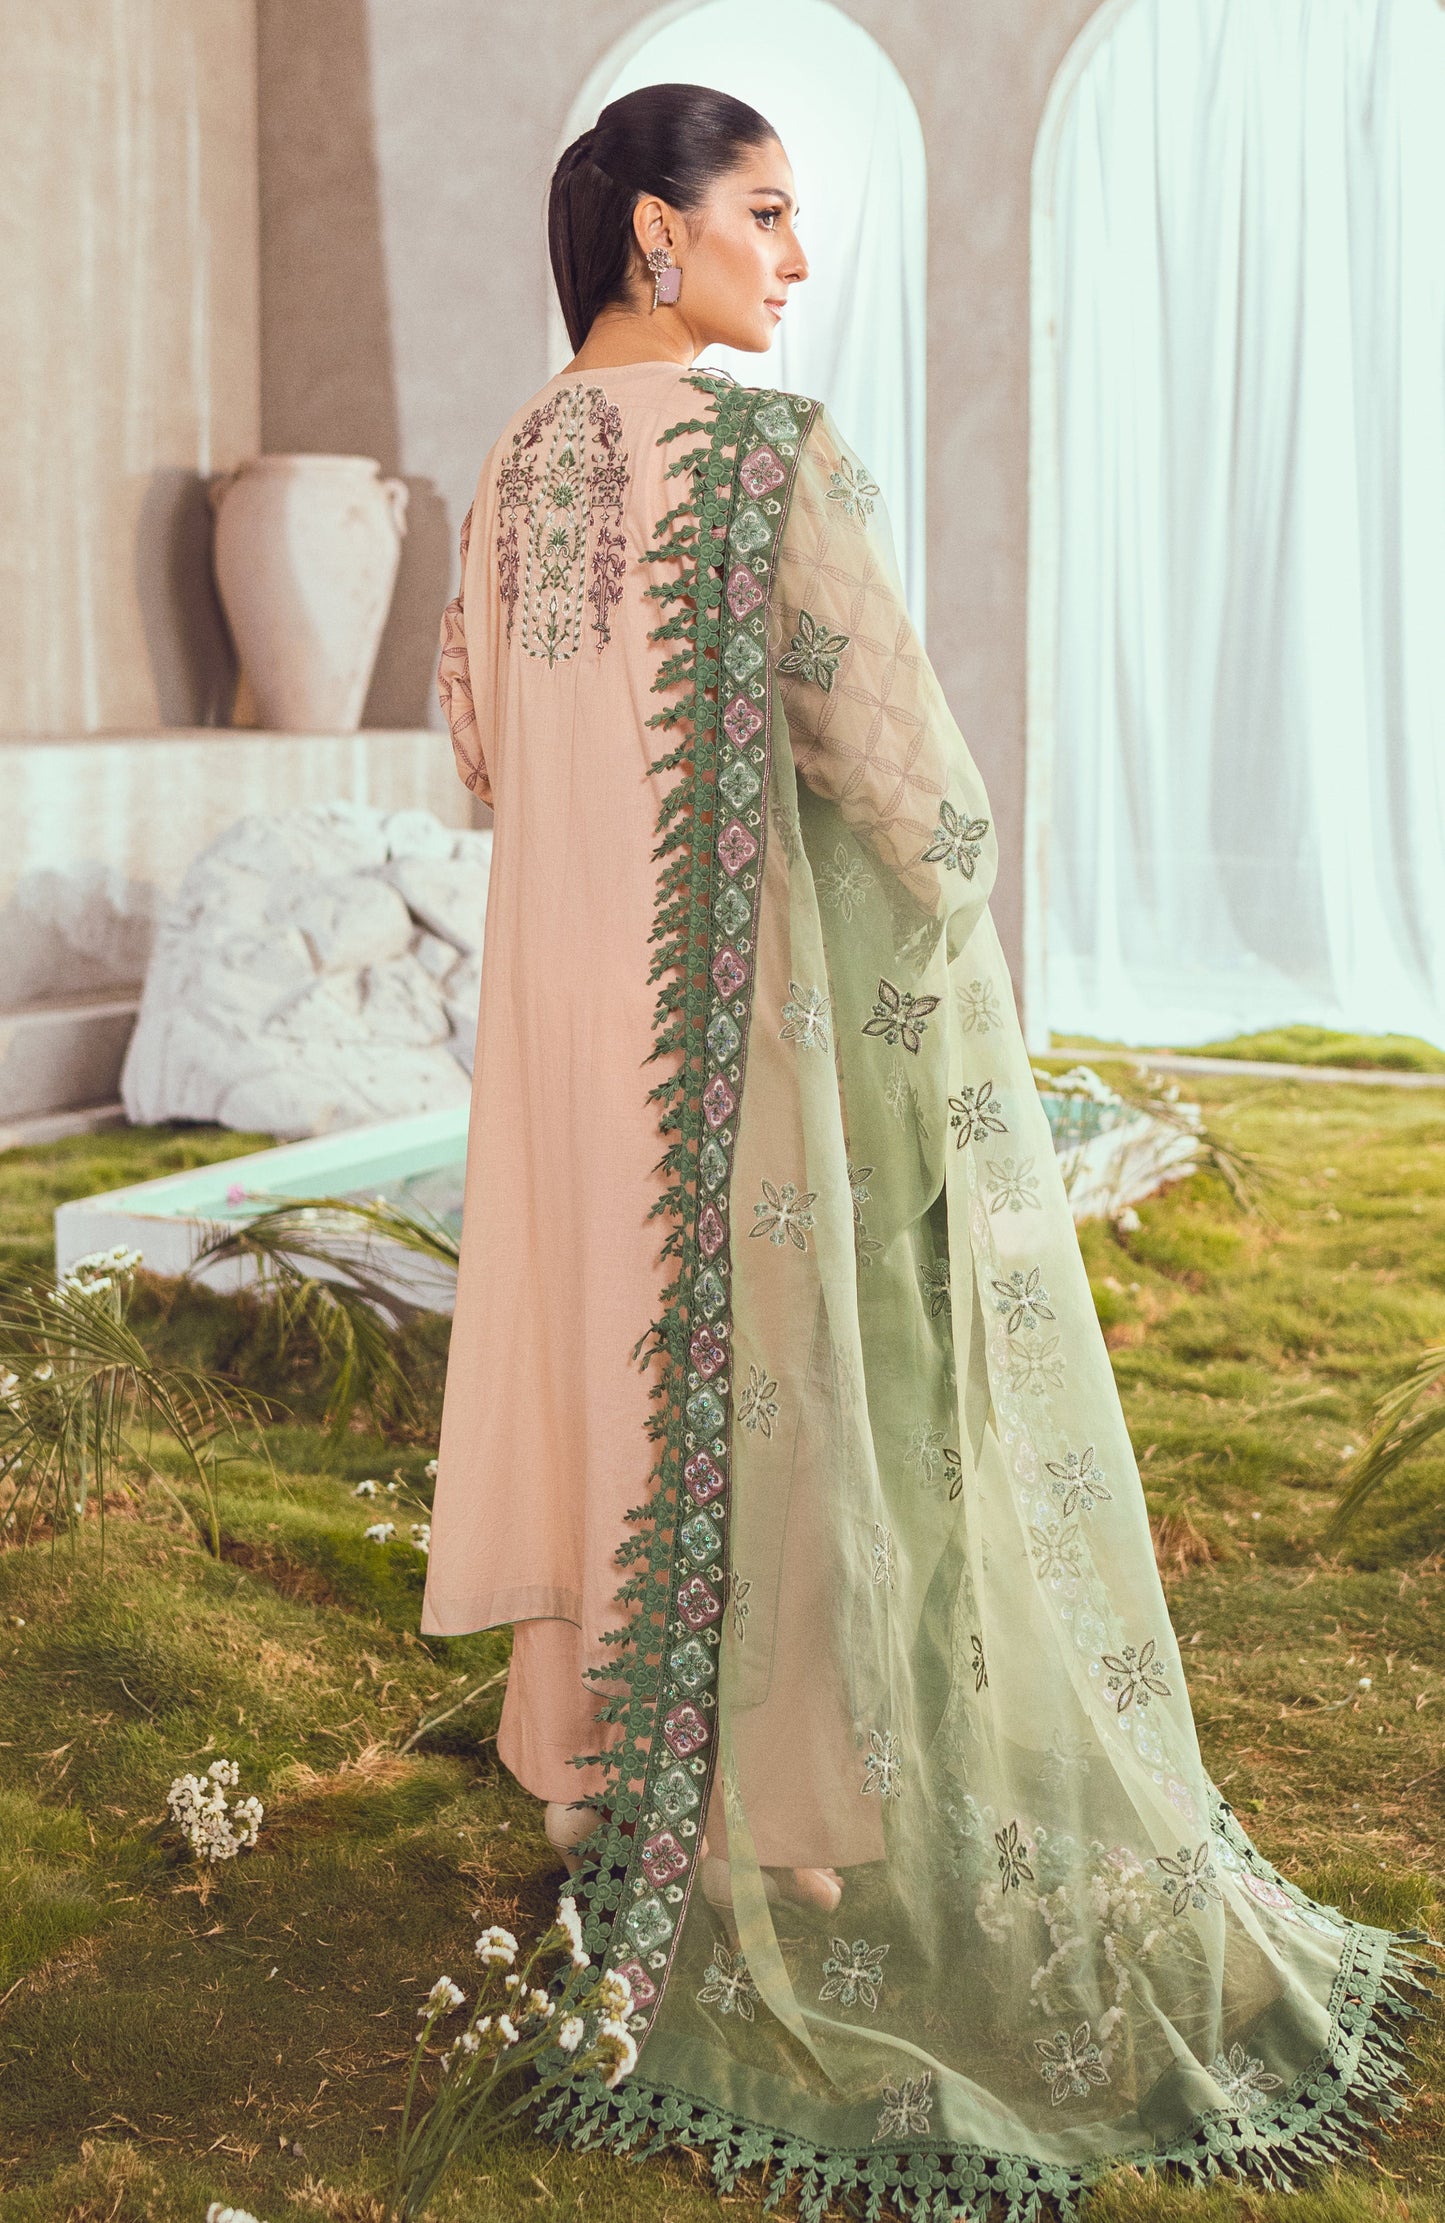 Buy Now, D#06 MAHIYMAAN - Eid Luxury Embroidered Lawn - Al Zohaib - Shahana Collection UK - Wedding and Bridal Party Dresses - Festive Eid 2023